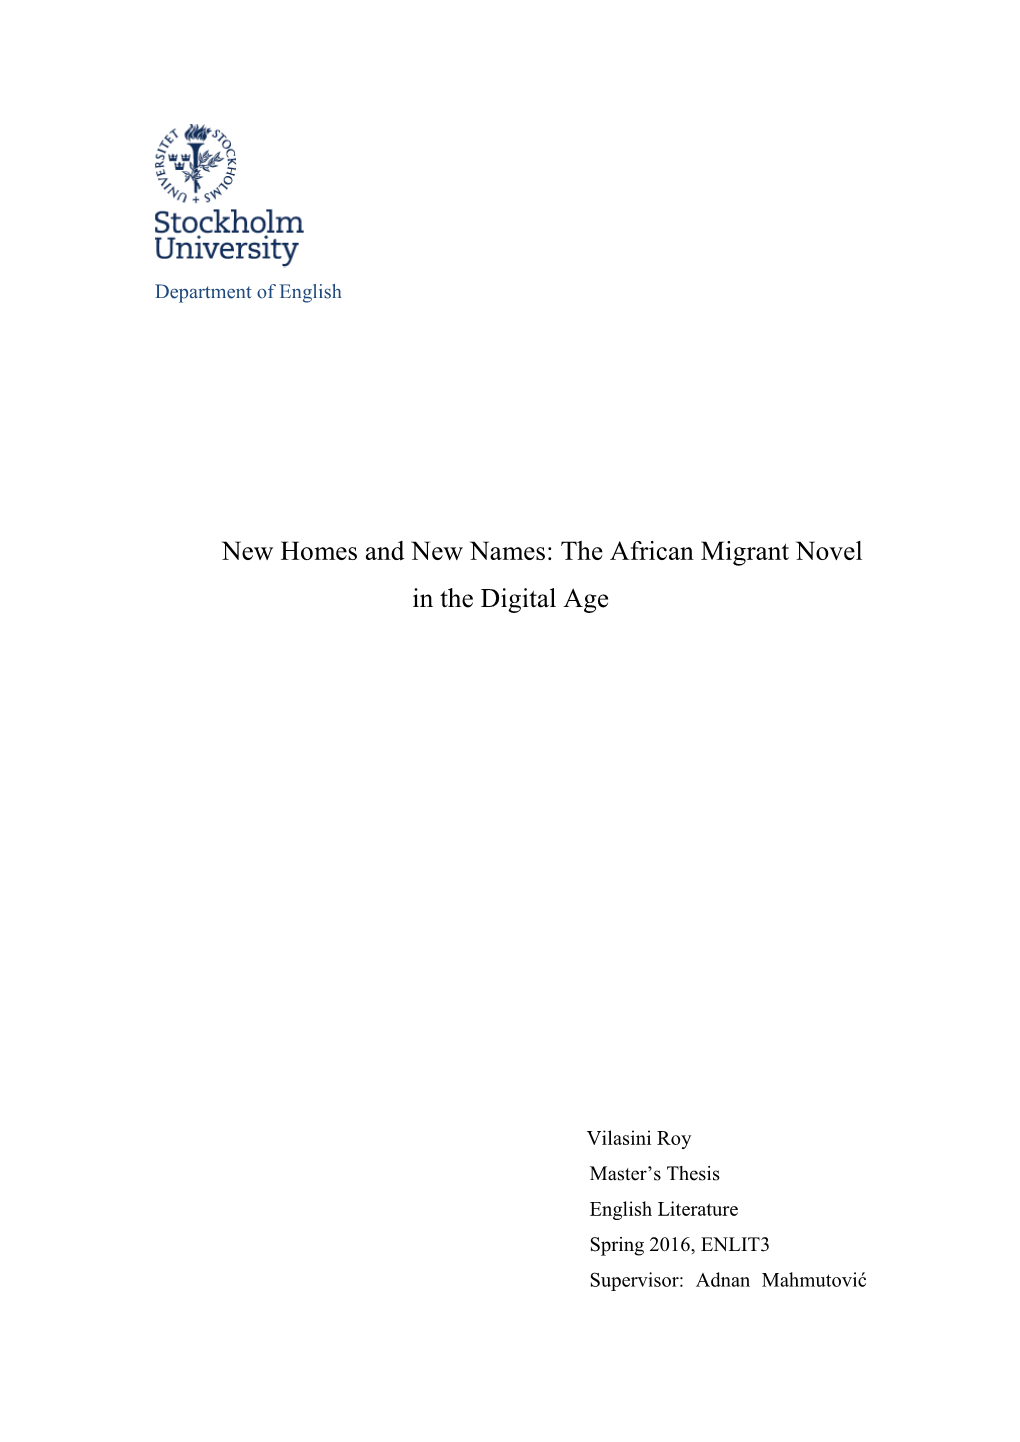 New Homes and New Names: the African Migrant Novel in the Digital Age